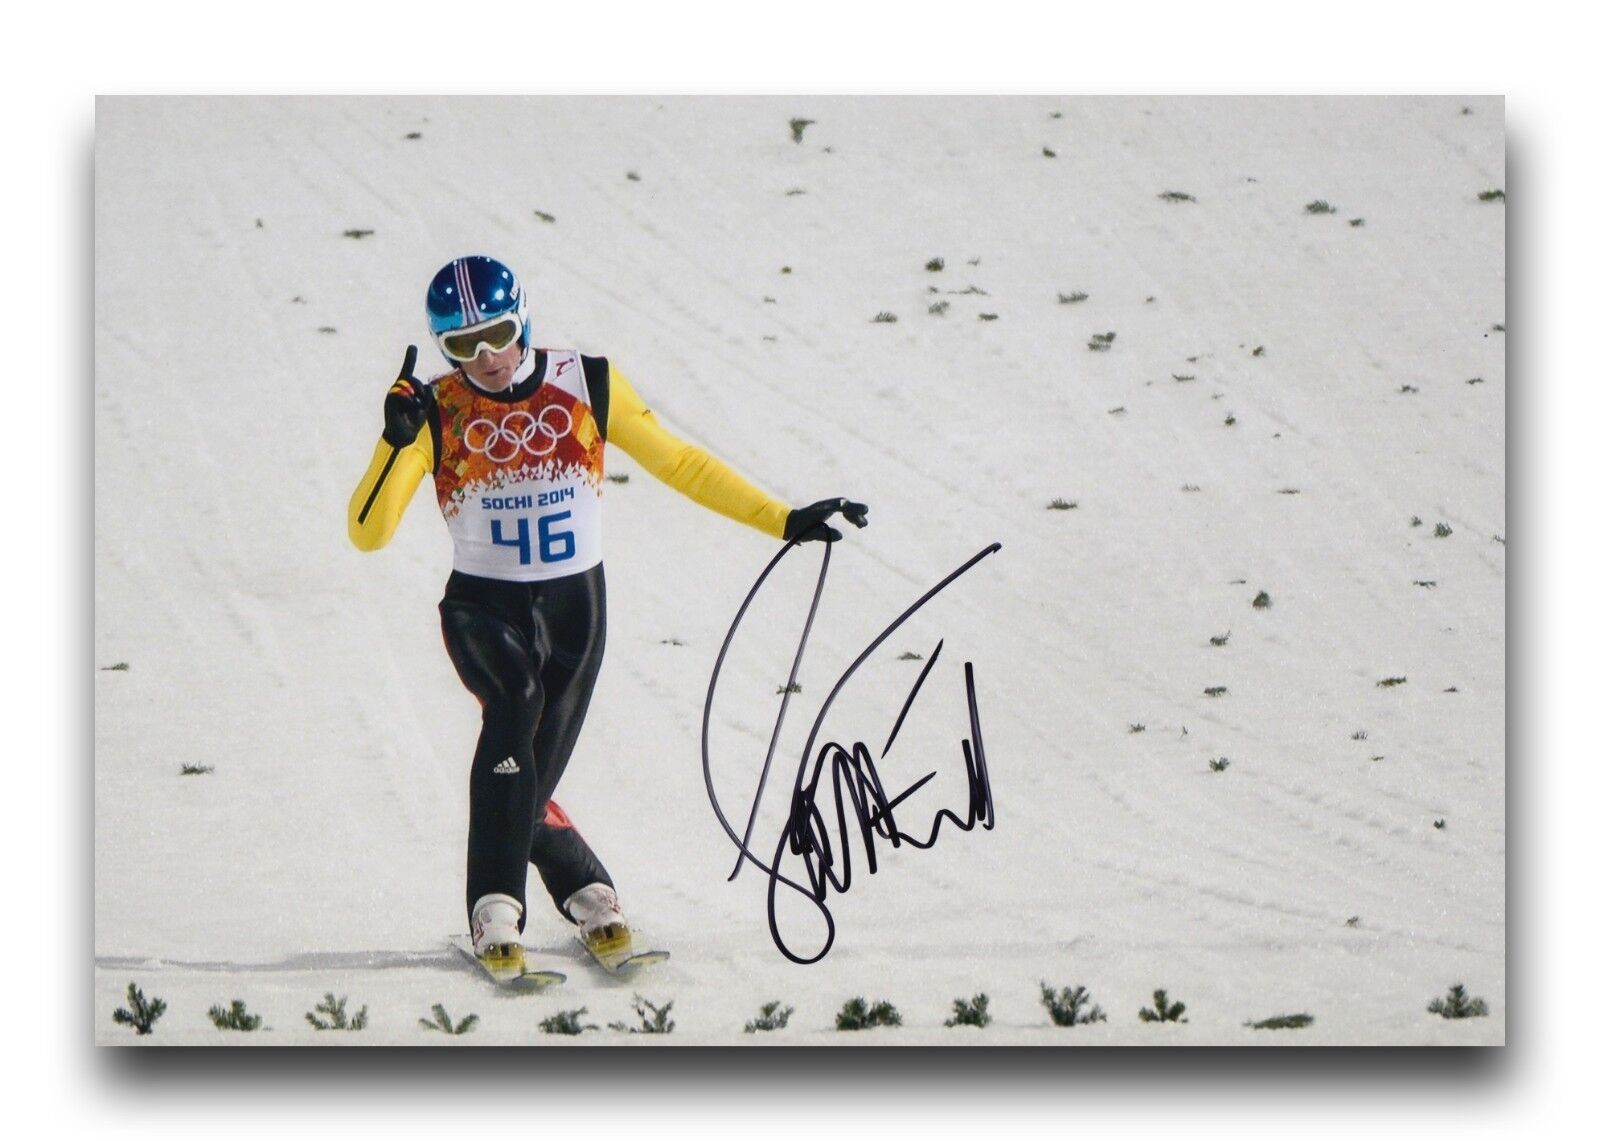 SEVERIN FREUND HAND SIGNED 12X8 Photo Poster painting SKI JUMPING 4.